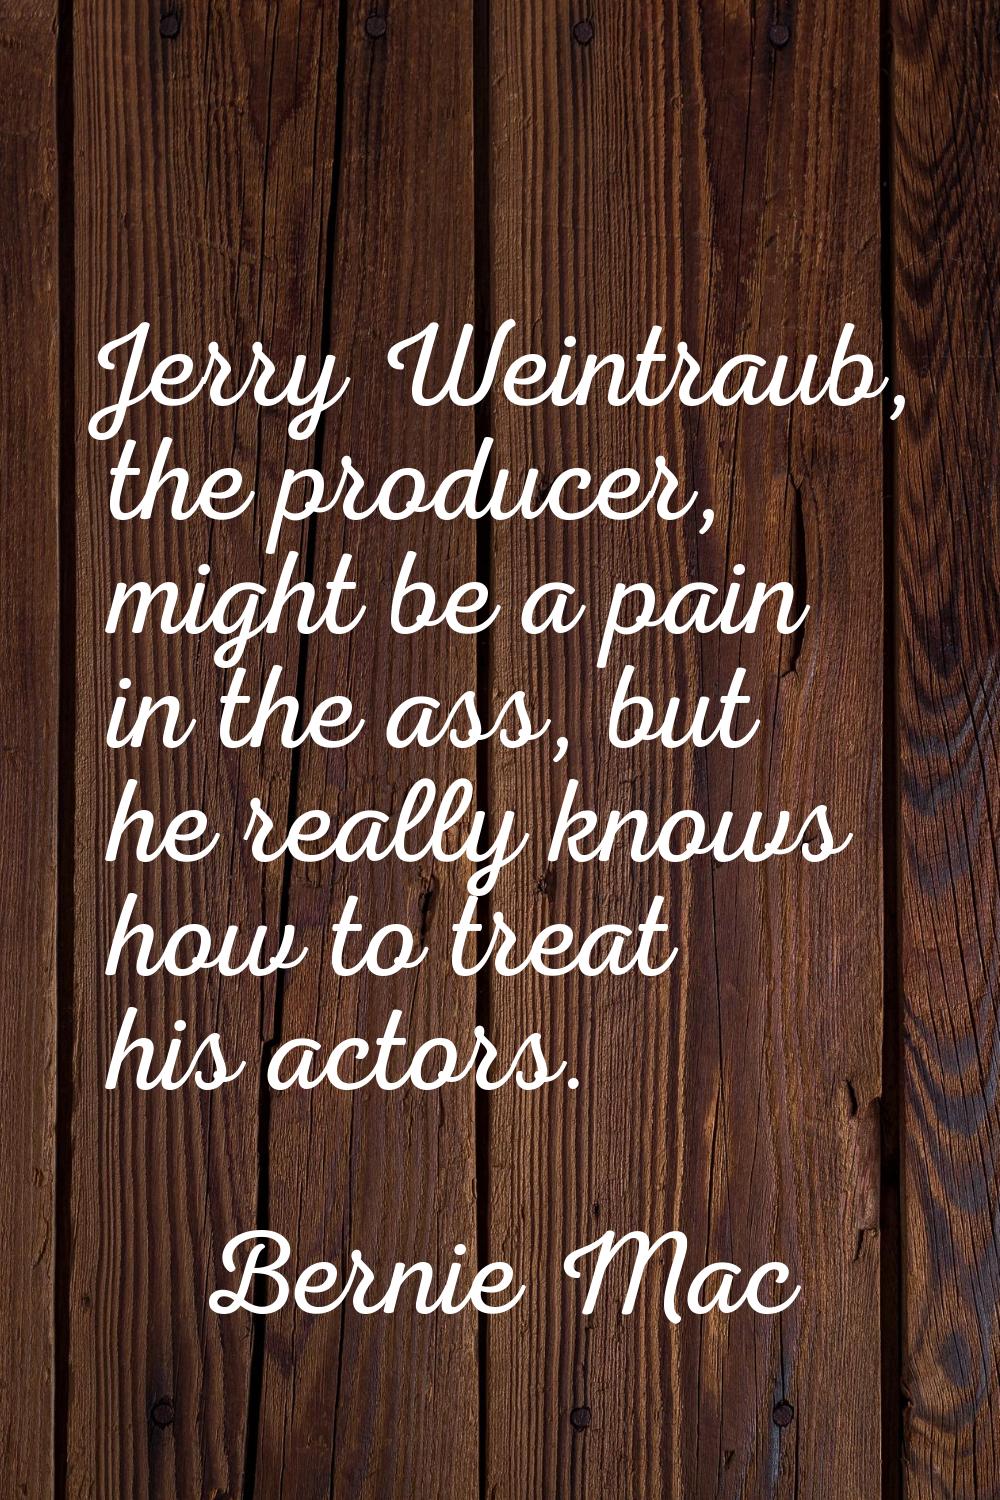 Jerry Weintraub, the producer, might be a pain in the ass, but he really knows how to treat his act